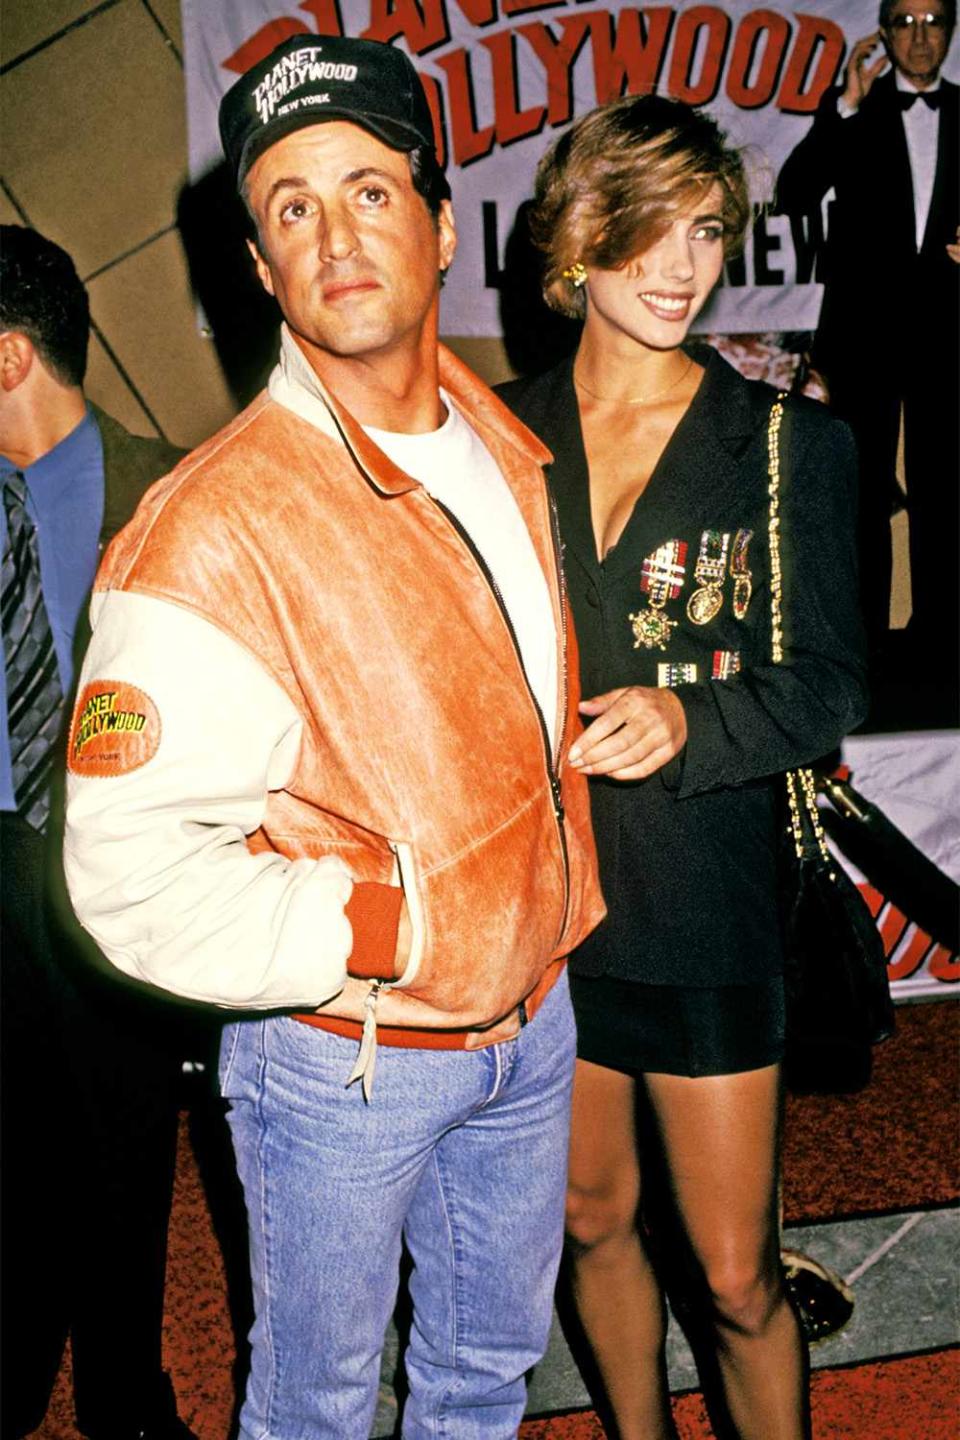 Sylvester Stallone And Jennifer Flavin during Planet Hollywood Grand Opening in New York at Planet Hollywood in New York City, New York, United States. (Photo by Ron Galella/Ron Galella Collection via Getty Images)